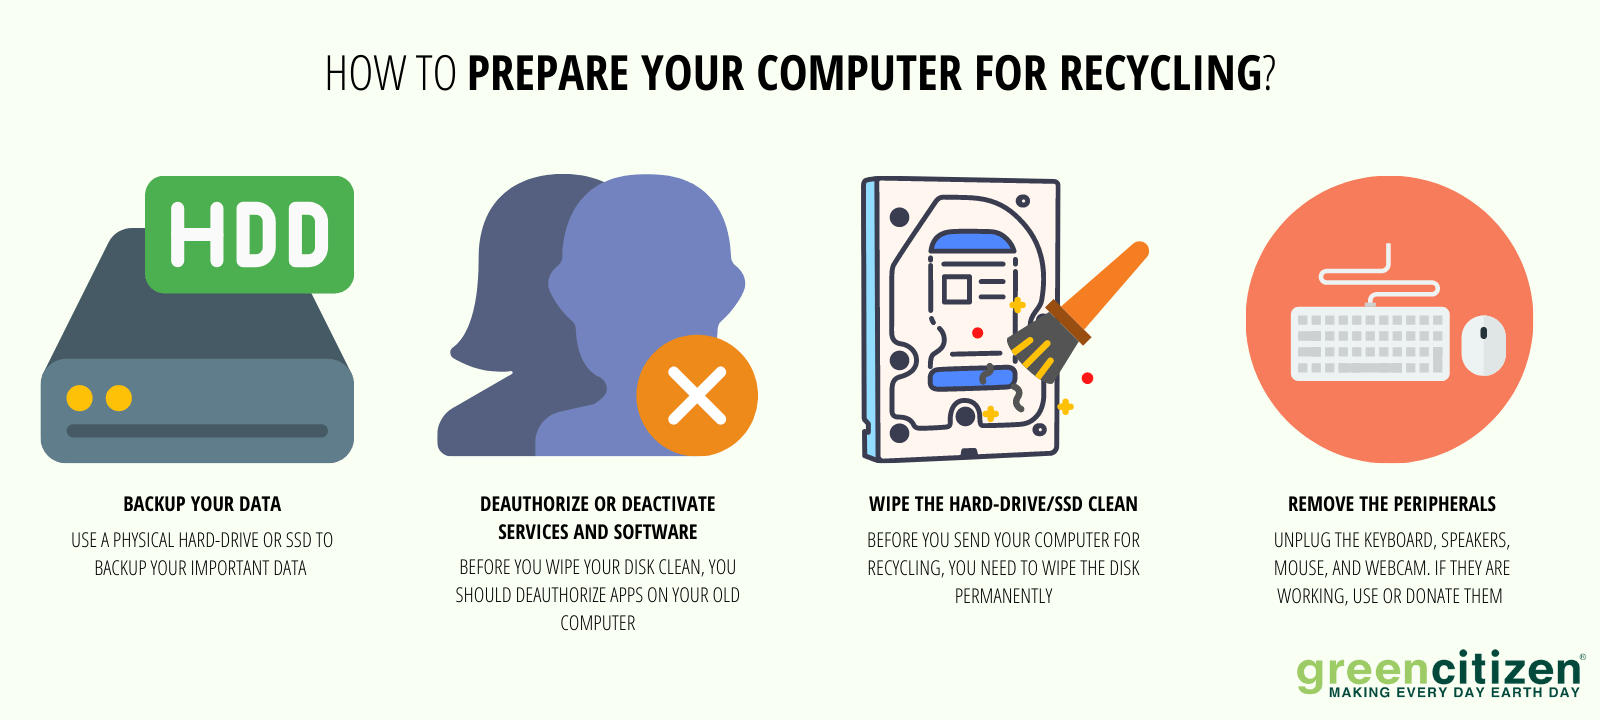 How to prepare computer for recycling